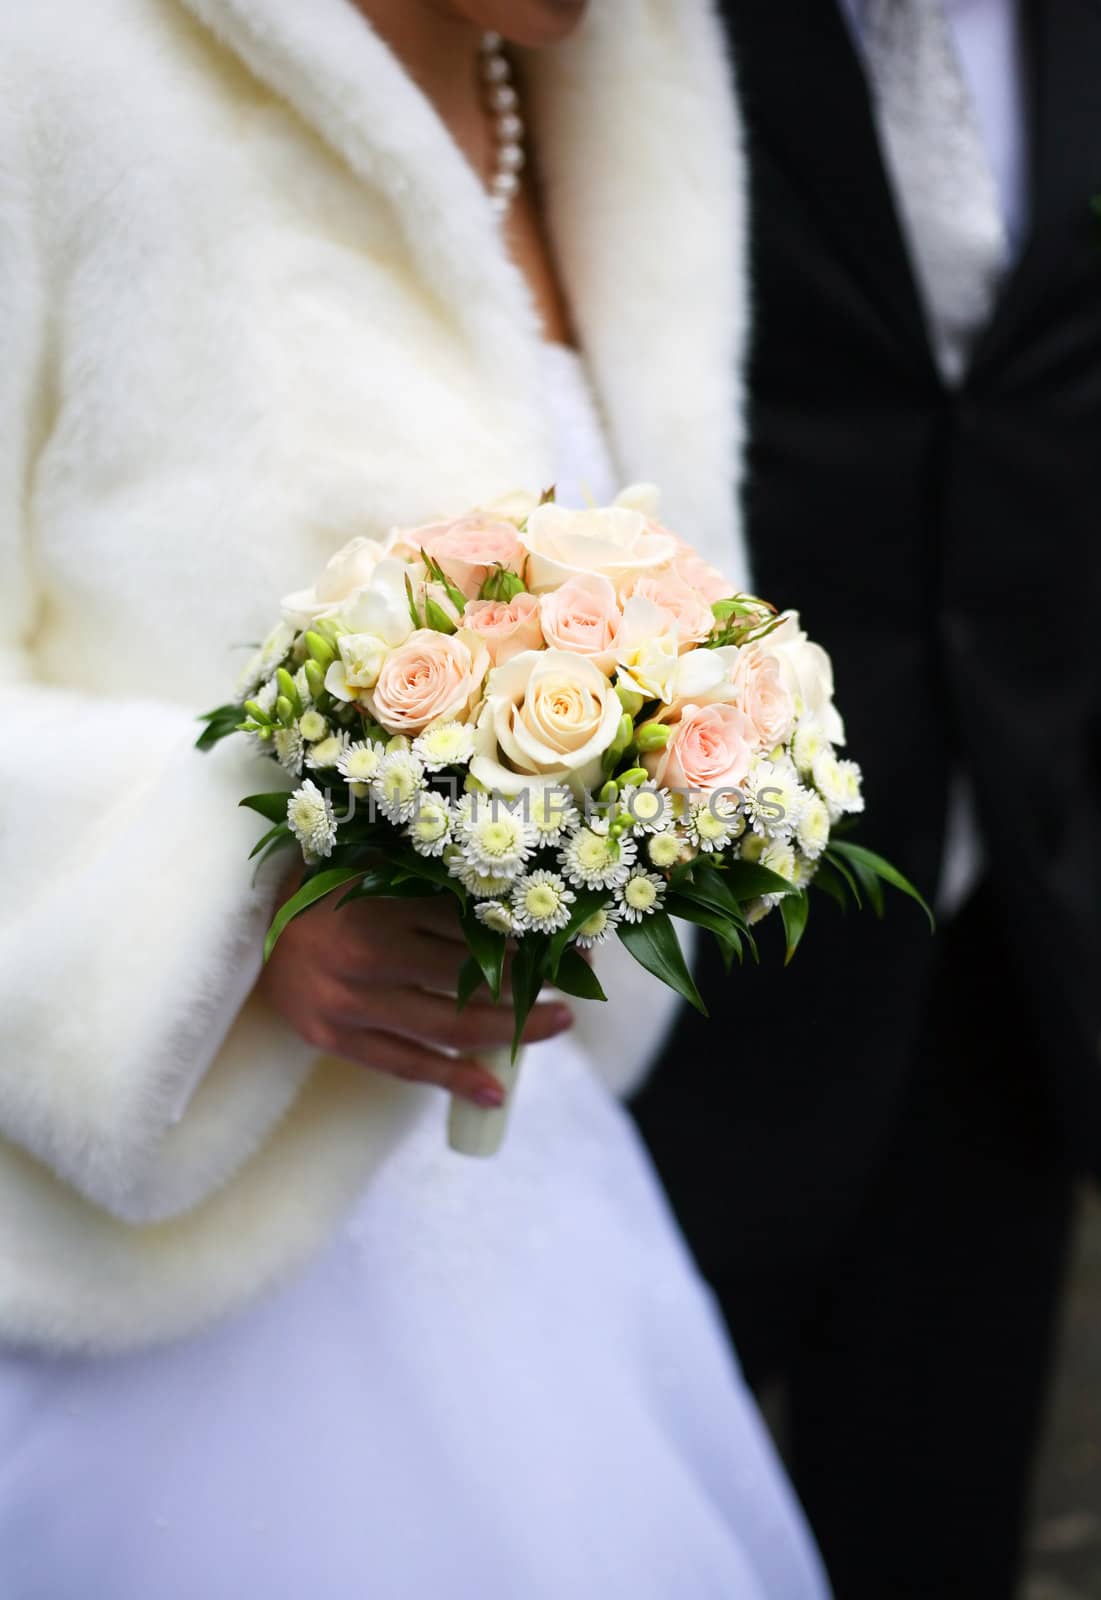 Bouquet of flowers on a background of a dress of the bride and a suit the groom.